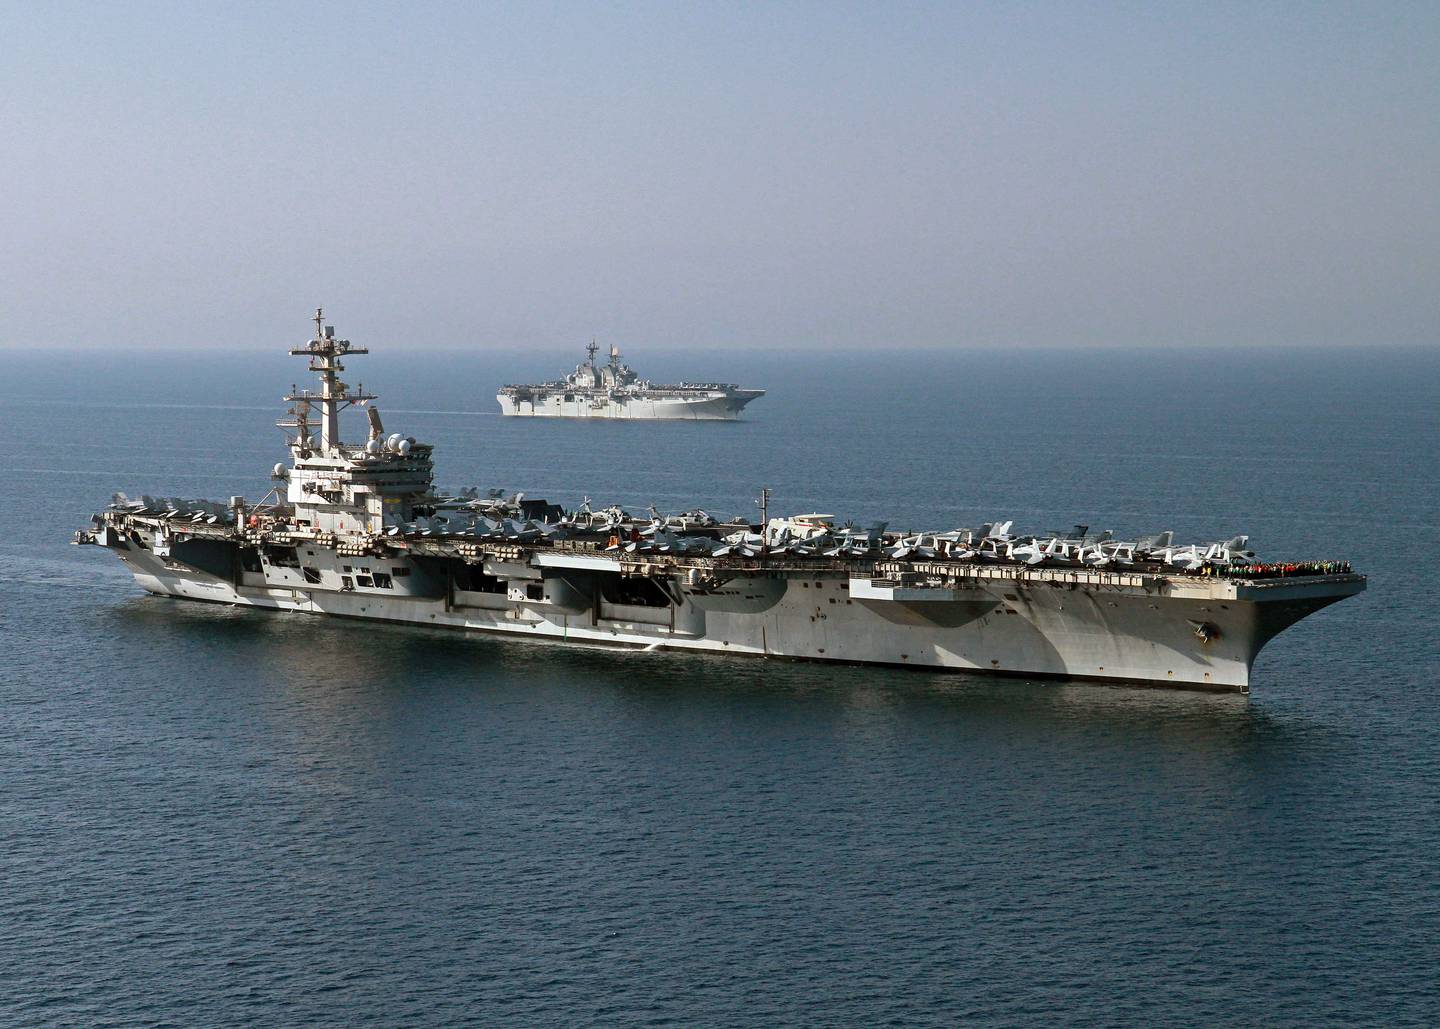 This US Navy photo obtained October 14, 2014 shows the amphibious assault ship USS Makin Island (LHD 8)as it pulls alongside the aircraft carrier USS George H.W. Bush (CVN 77) for a vertical replenishment on October 10, 2014 in the Gulf. George H.W. Bush is supporting maritime security operations, strike operations in Iraq and Syria as directed, and theater security cooperation efforts in the US 5th Fleet area of responsibility. AFP PHOTO/US NAVY/ Juan D. Guerra = RESTRICTED TO EDITORIAL USE - MANDATORY CREDIT "AFP PHOTO / US NAVY/ Juan D. Guerra /HANDOUT" - NO MARKETING NO ADVERTISING CAMPAIGNS - DISTRIBUTED AS A SERVICE TO CLIENTS = (Photo by Juan David Guerra / US NAVY / AFP)